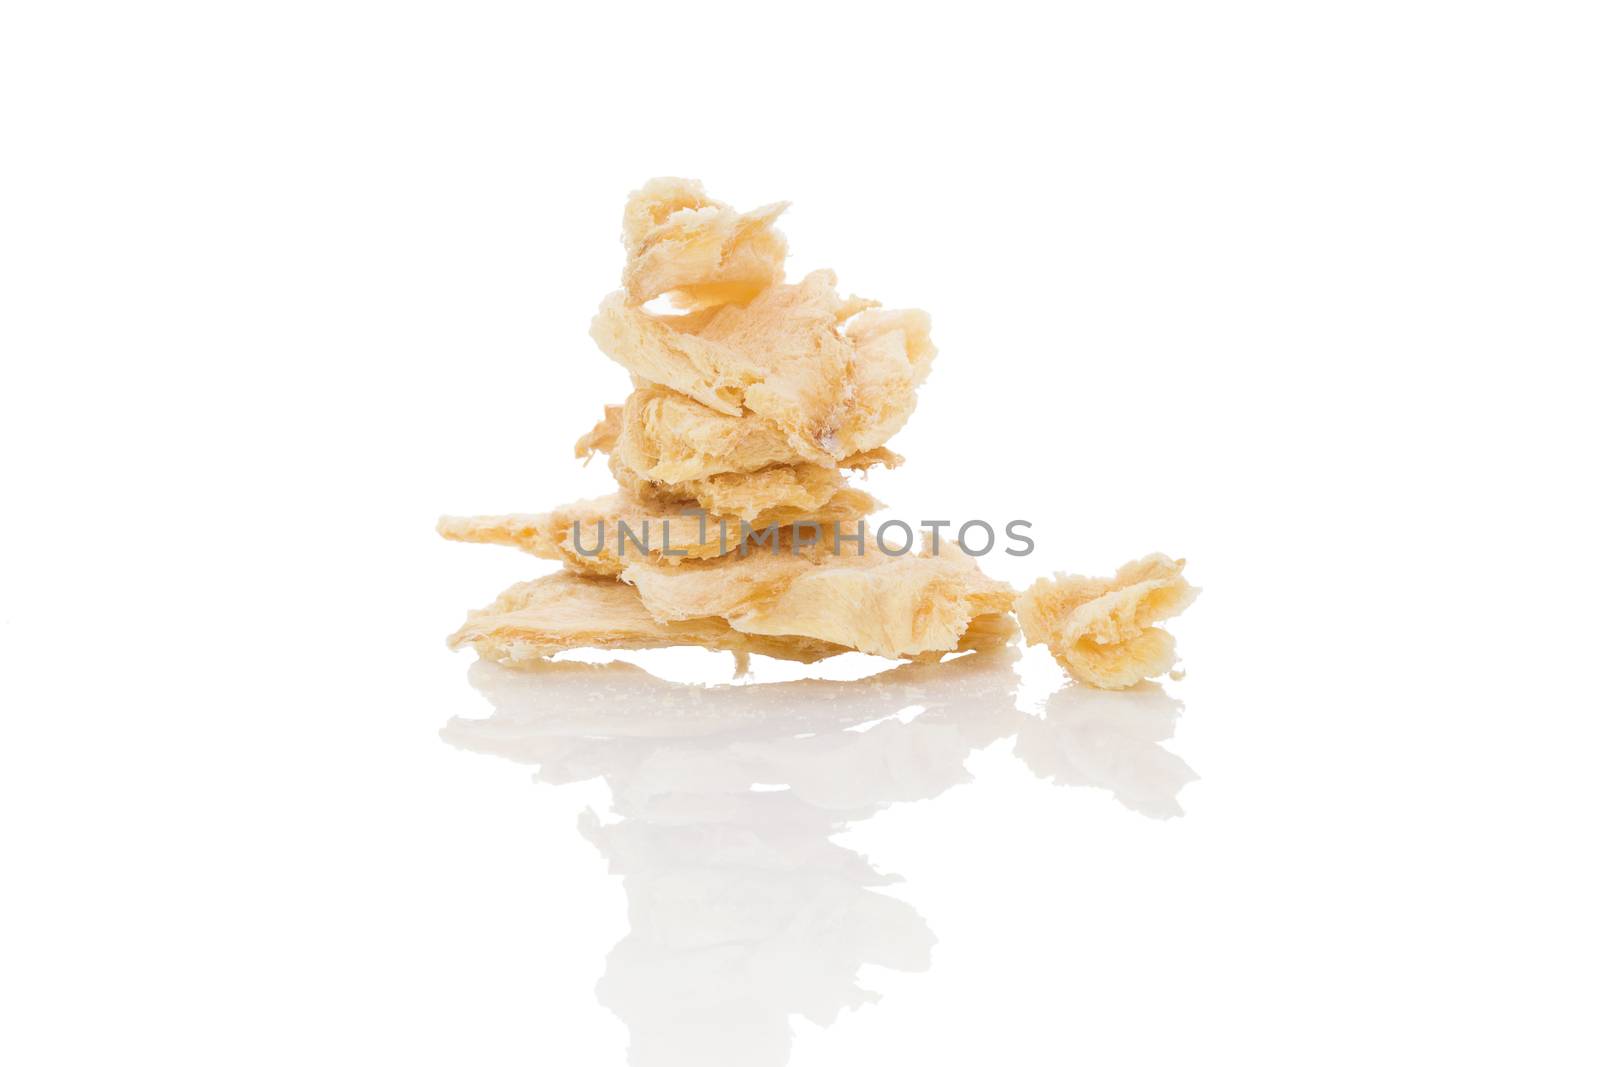 Dried fish pieces isolated on white background. Healthy traditional seafood snack.